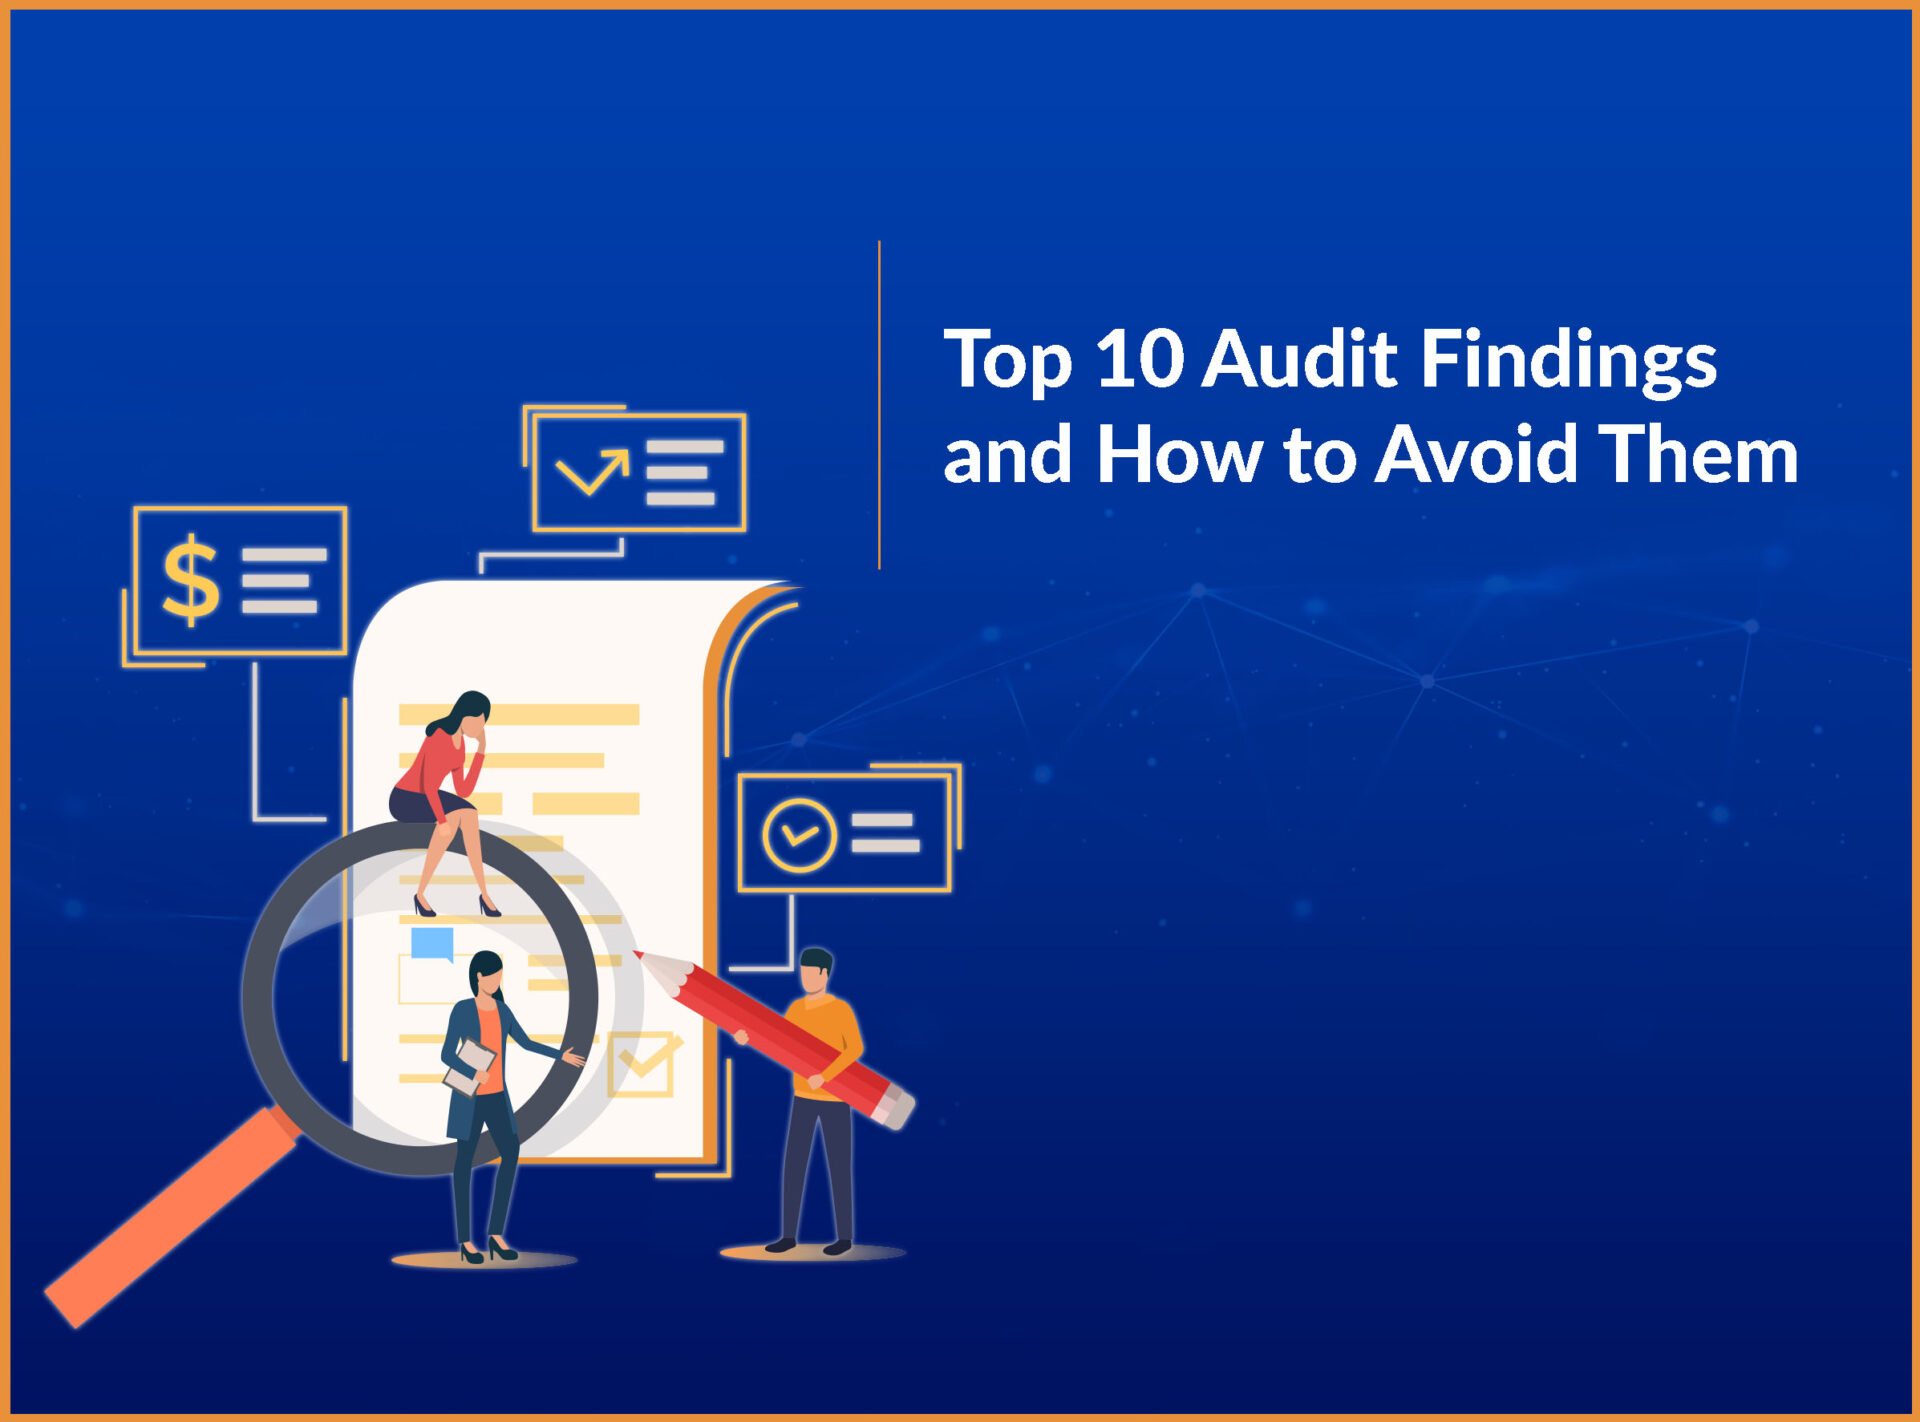 Top 10 Audit Findings and How to Avoid Them